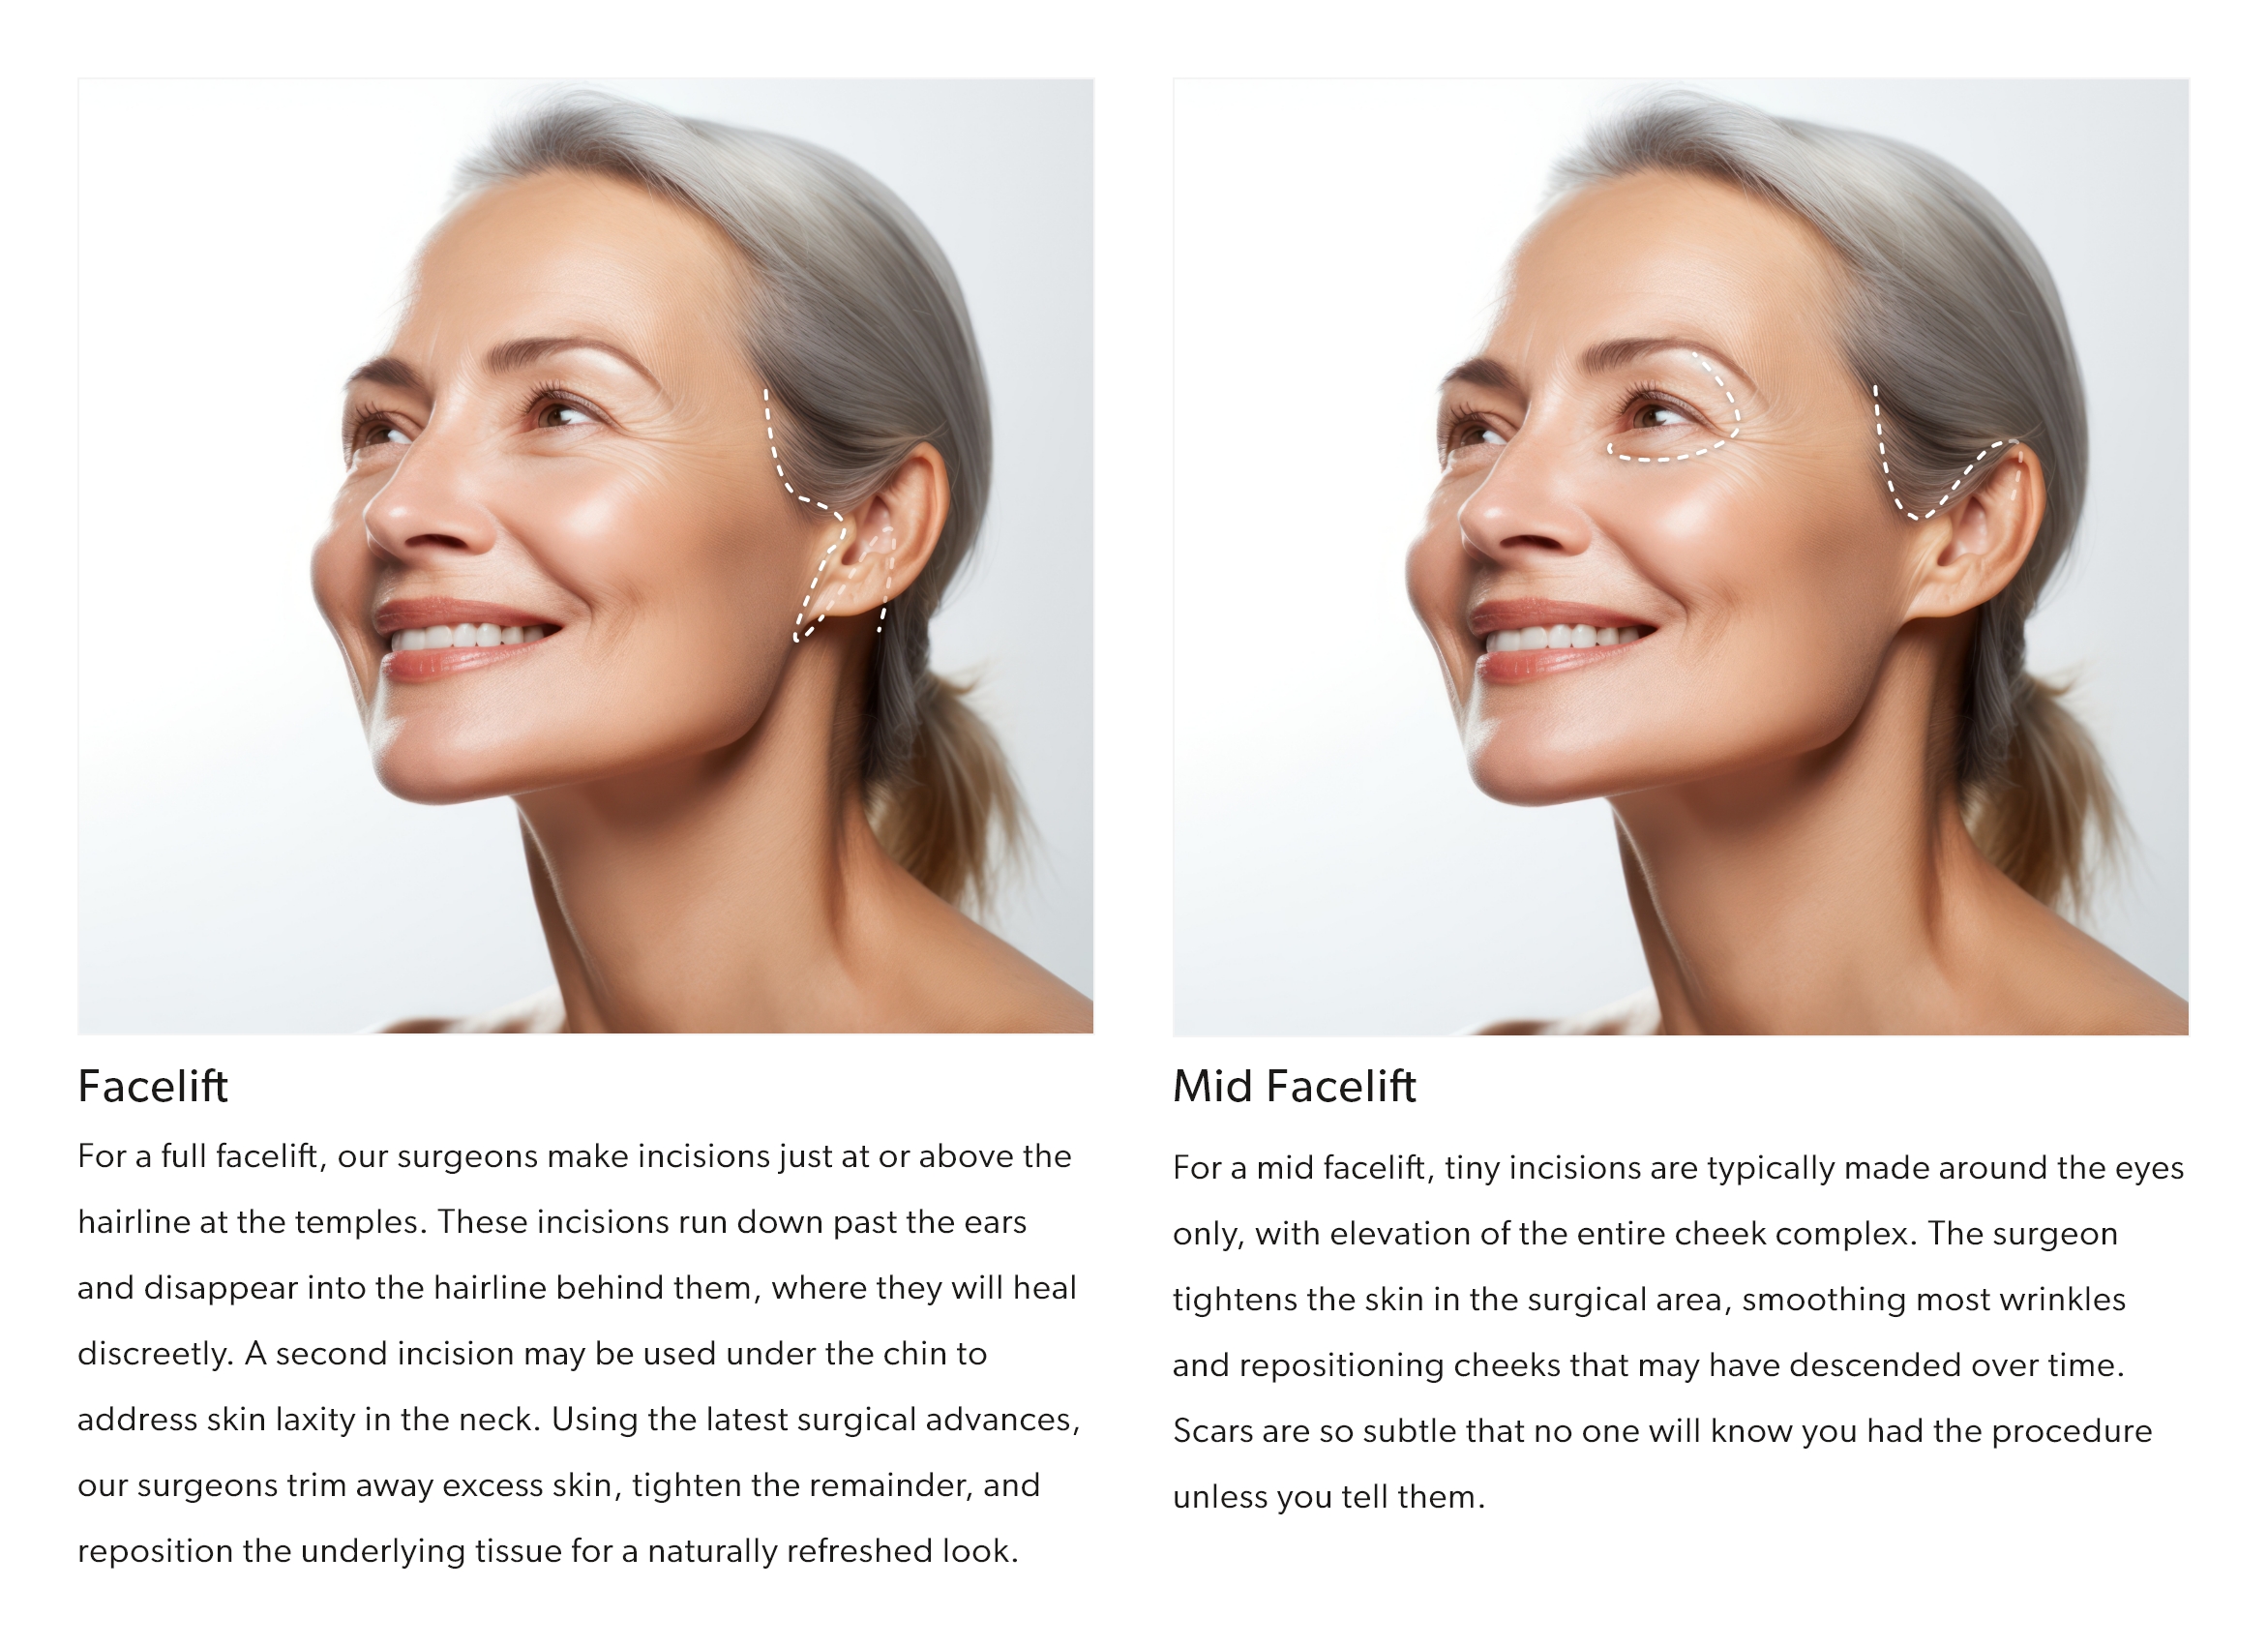 Differences between facelift and mini facelift incisions